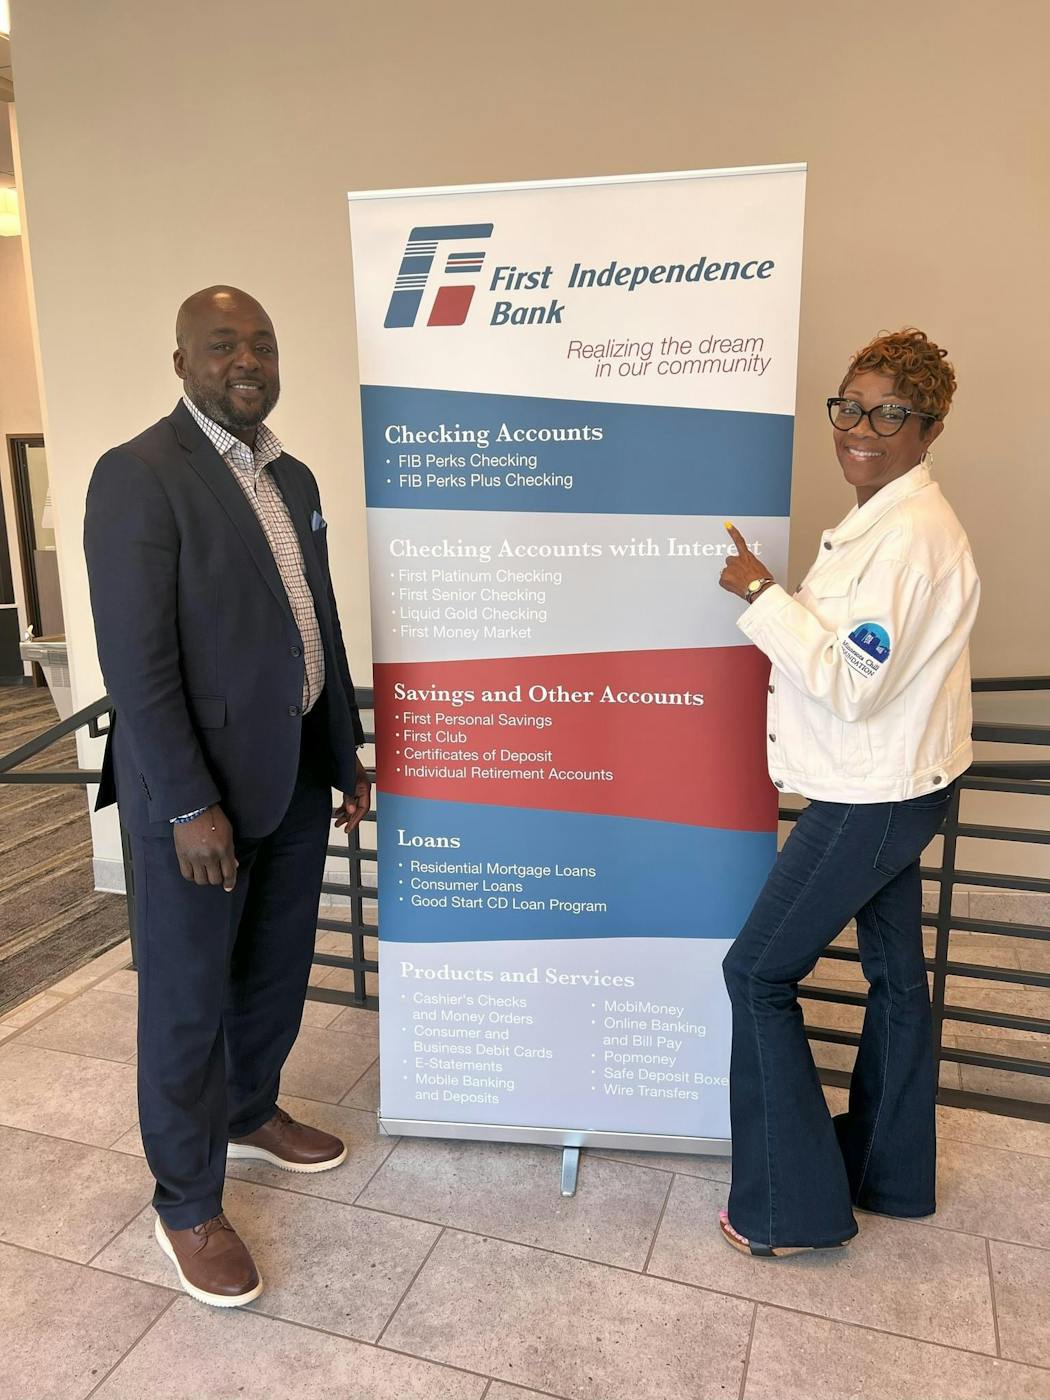 Cindy Hill posted this picture to Facebook after opening an account for her nonprofit at First Independence Bank last month. “Challenge accepted!” she wrote in the post, referring to the million dollar deposit challenge launched by the Minnesota Business Coalition for Racial Equity.